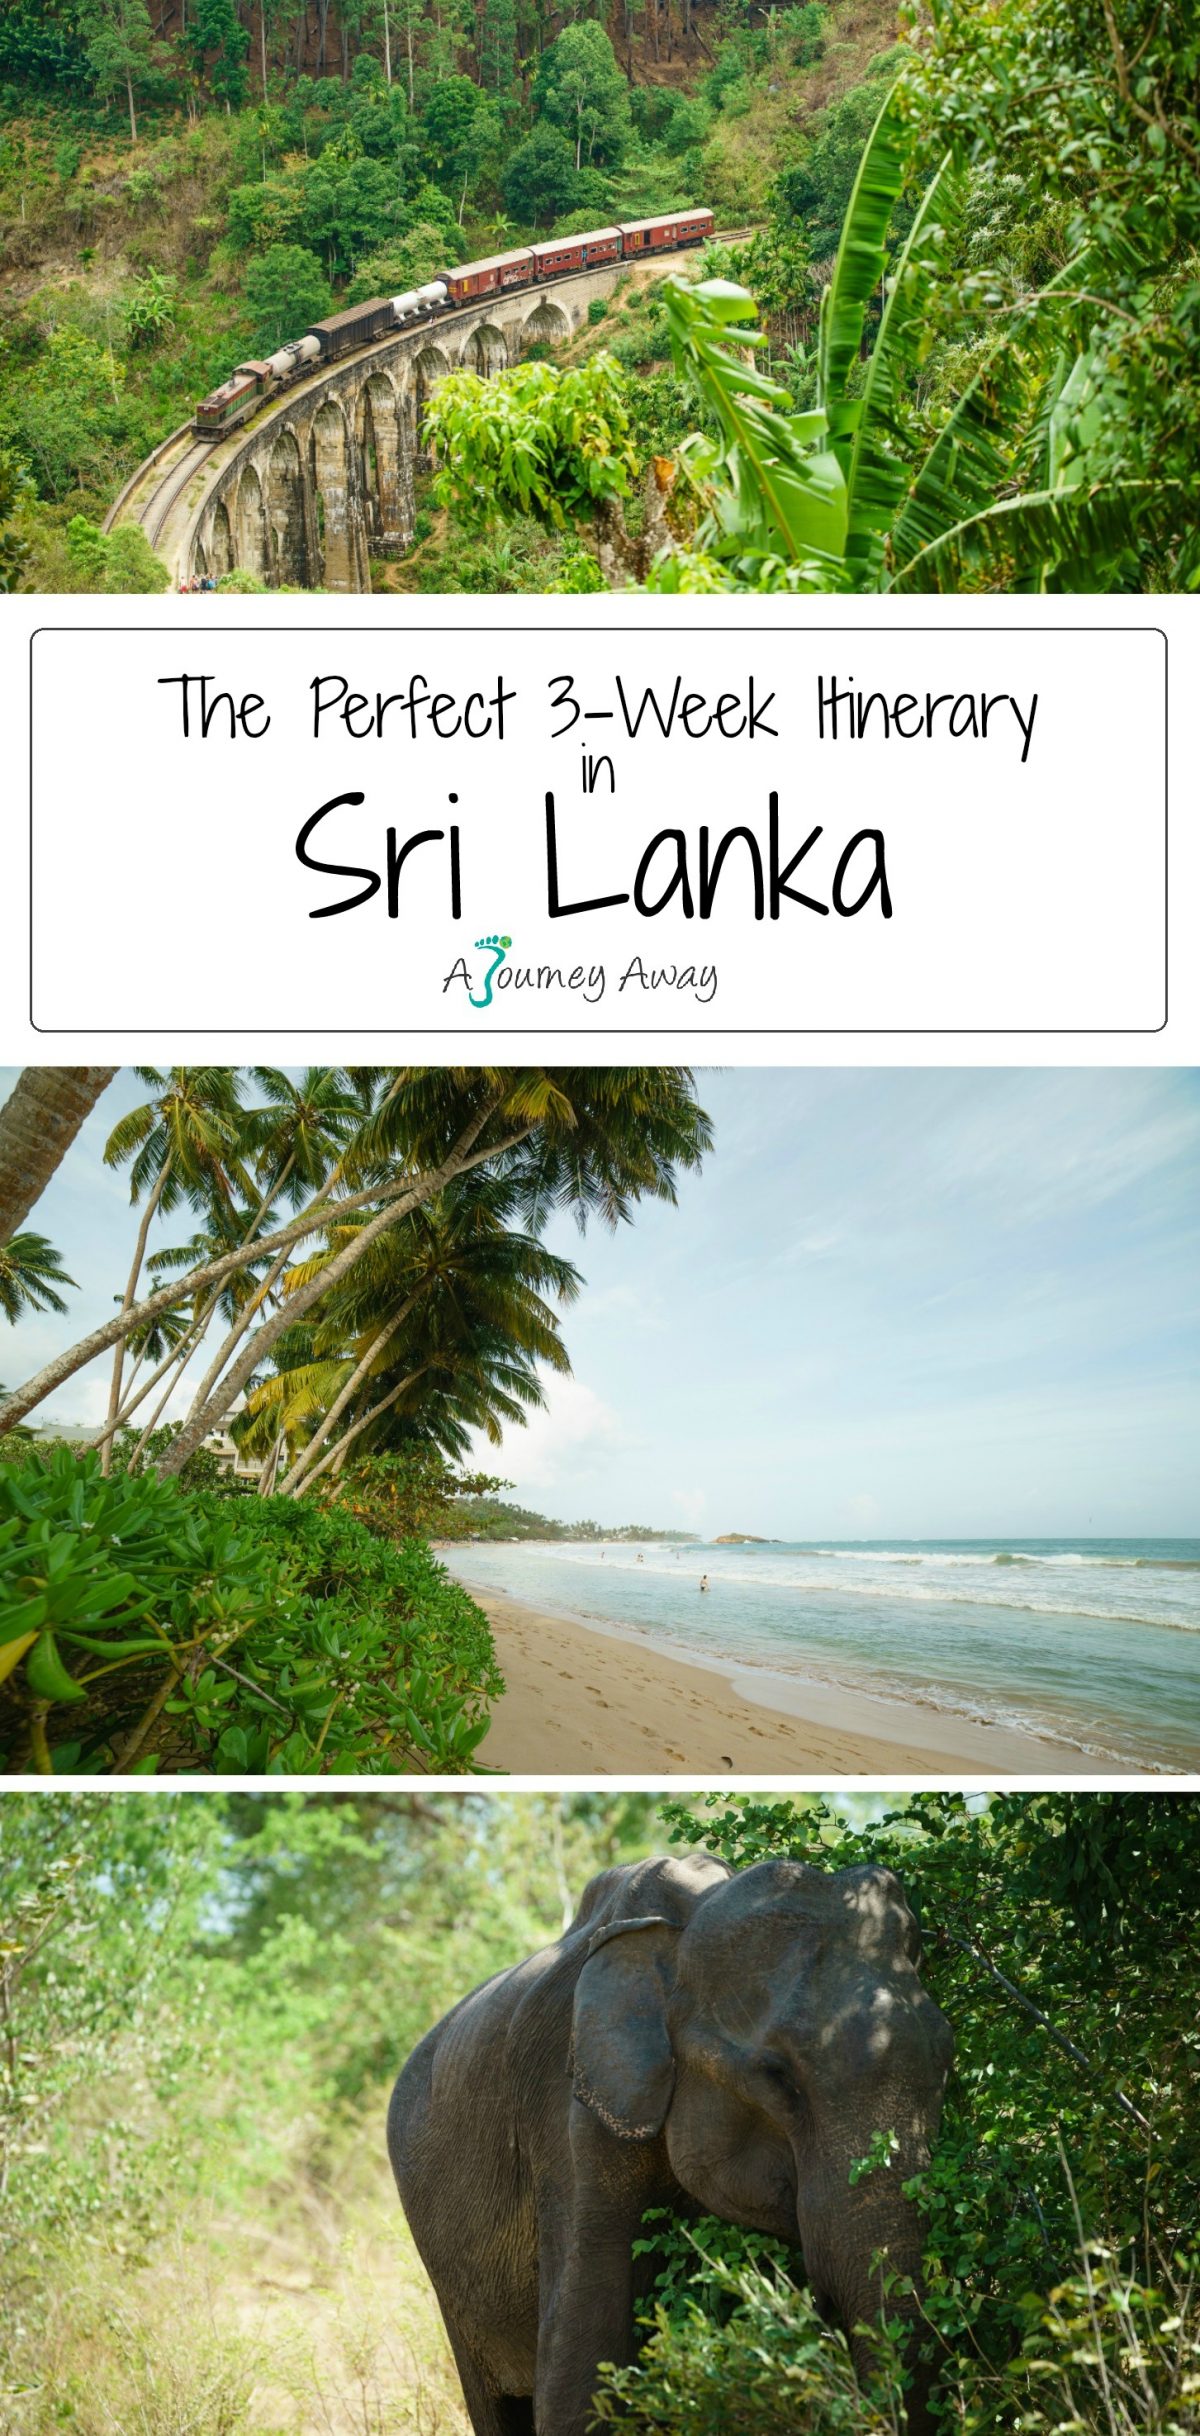 The Perfect 3-Week Itinerary in Sri Lanka | A Journey Away travel blog